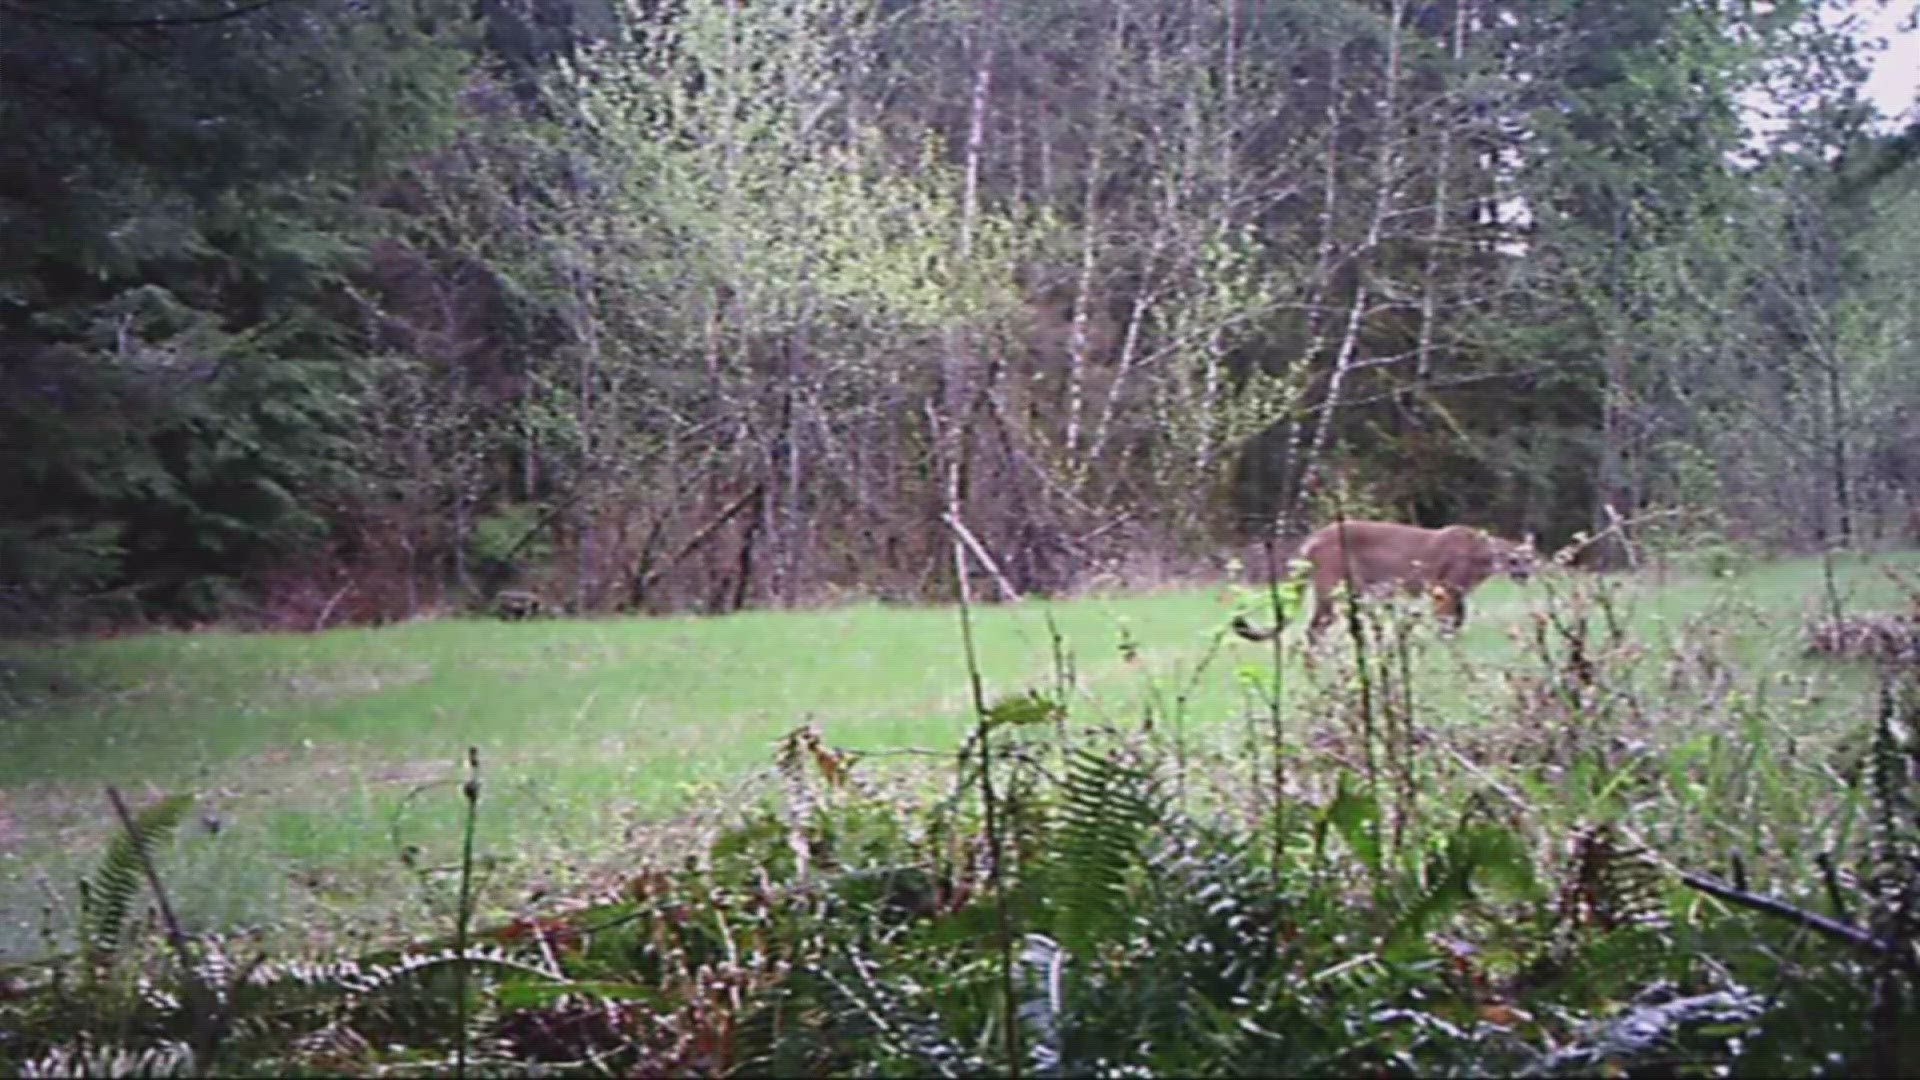 A cougar attacked an 8-year-old in Olympic National Park over the weekend. The child sustained minor injuries.